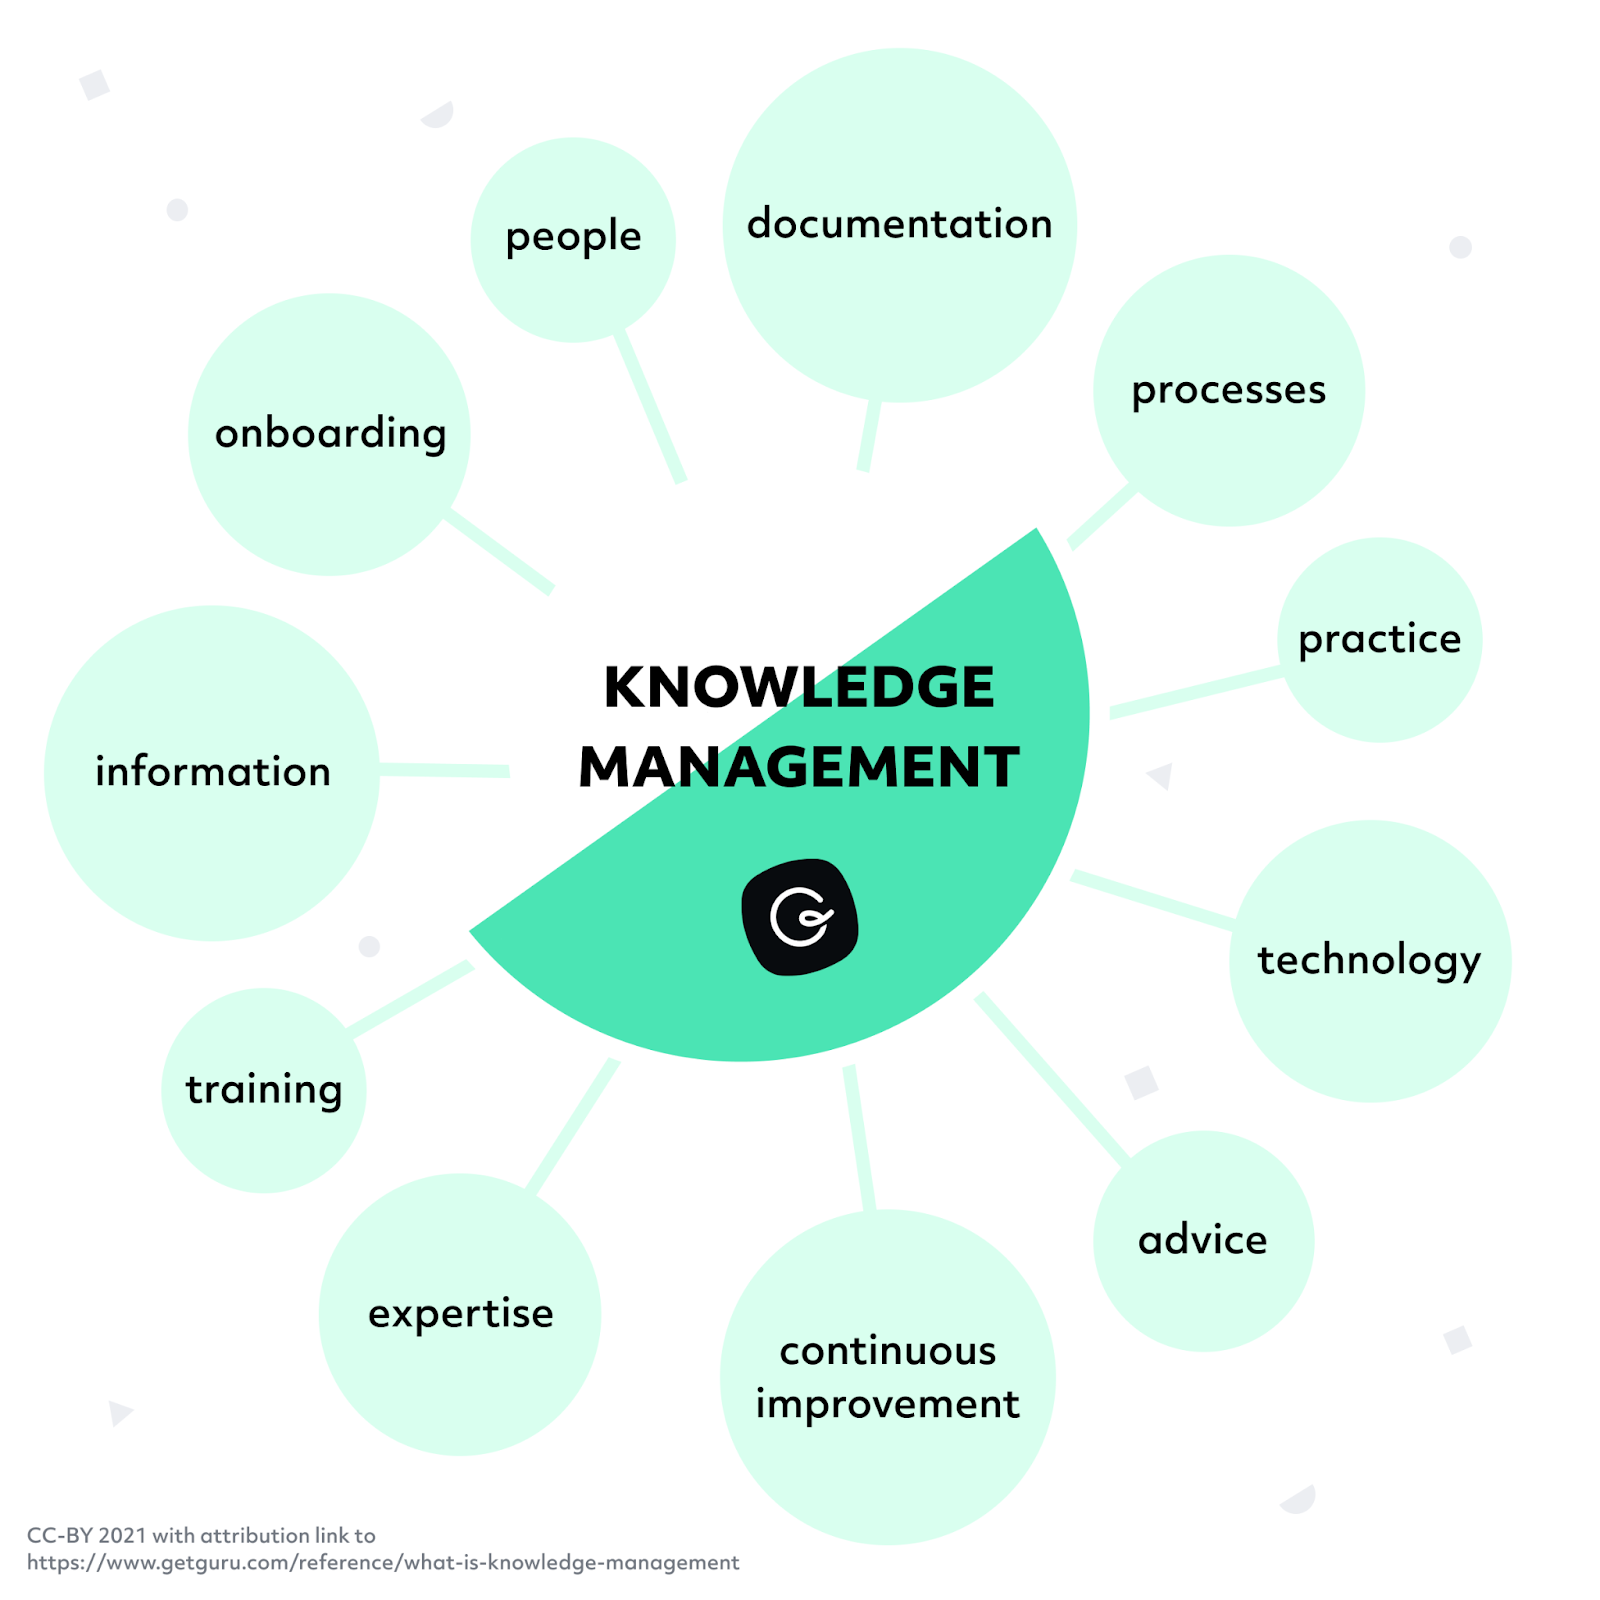 Knowledge Management as a Service